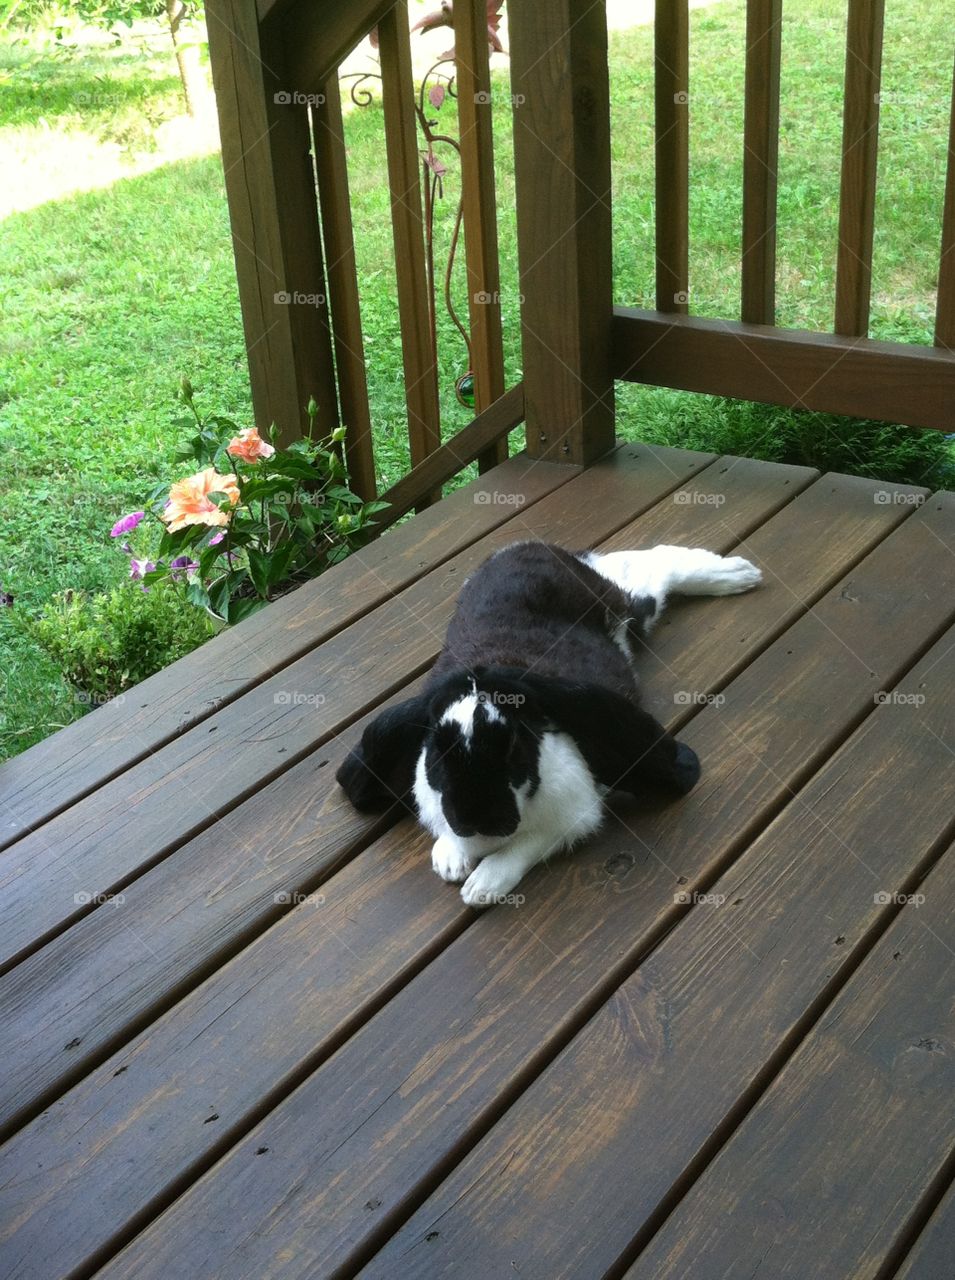 English lop rabbit relaxing on the porch